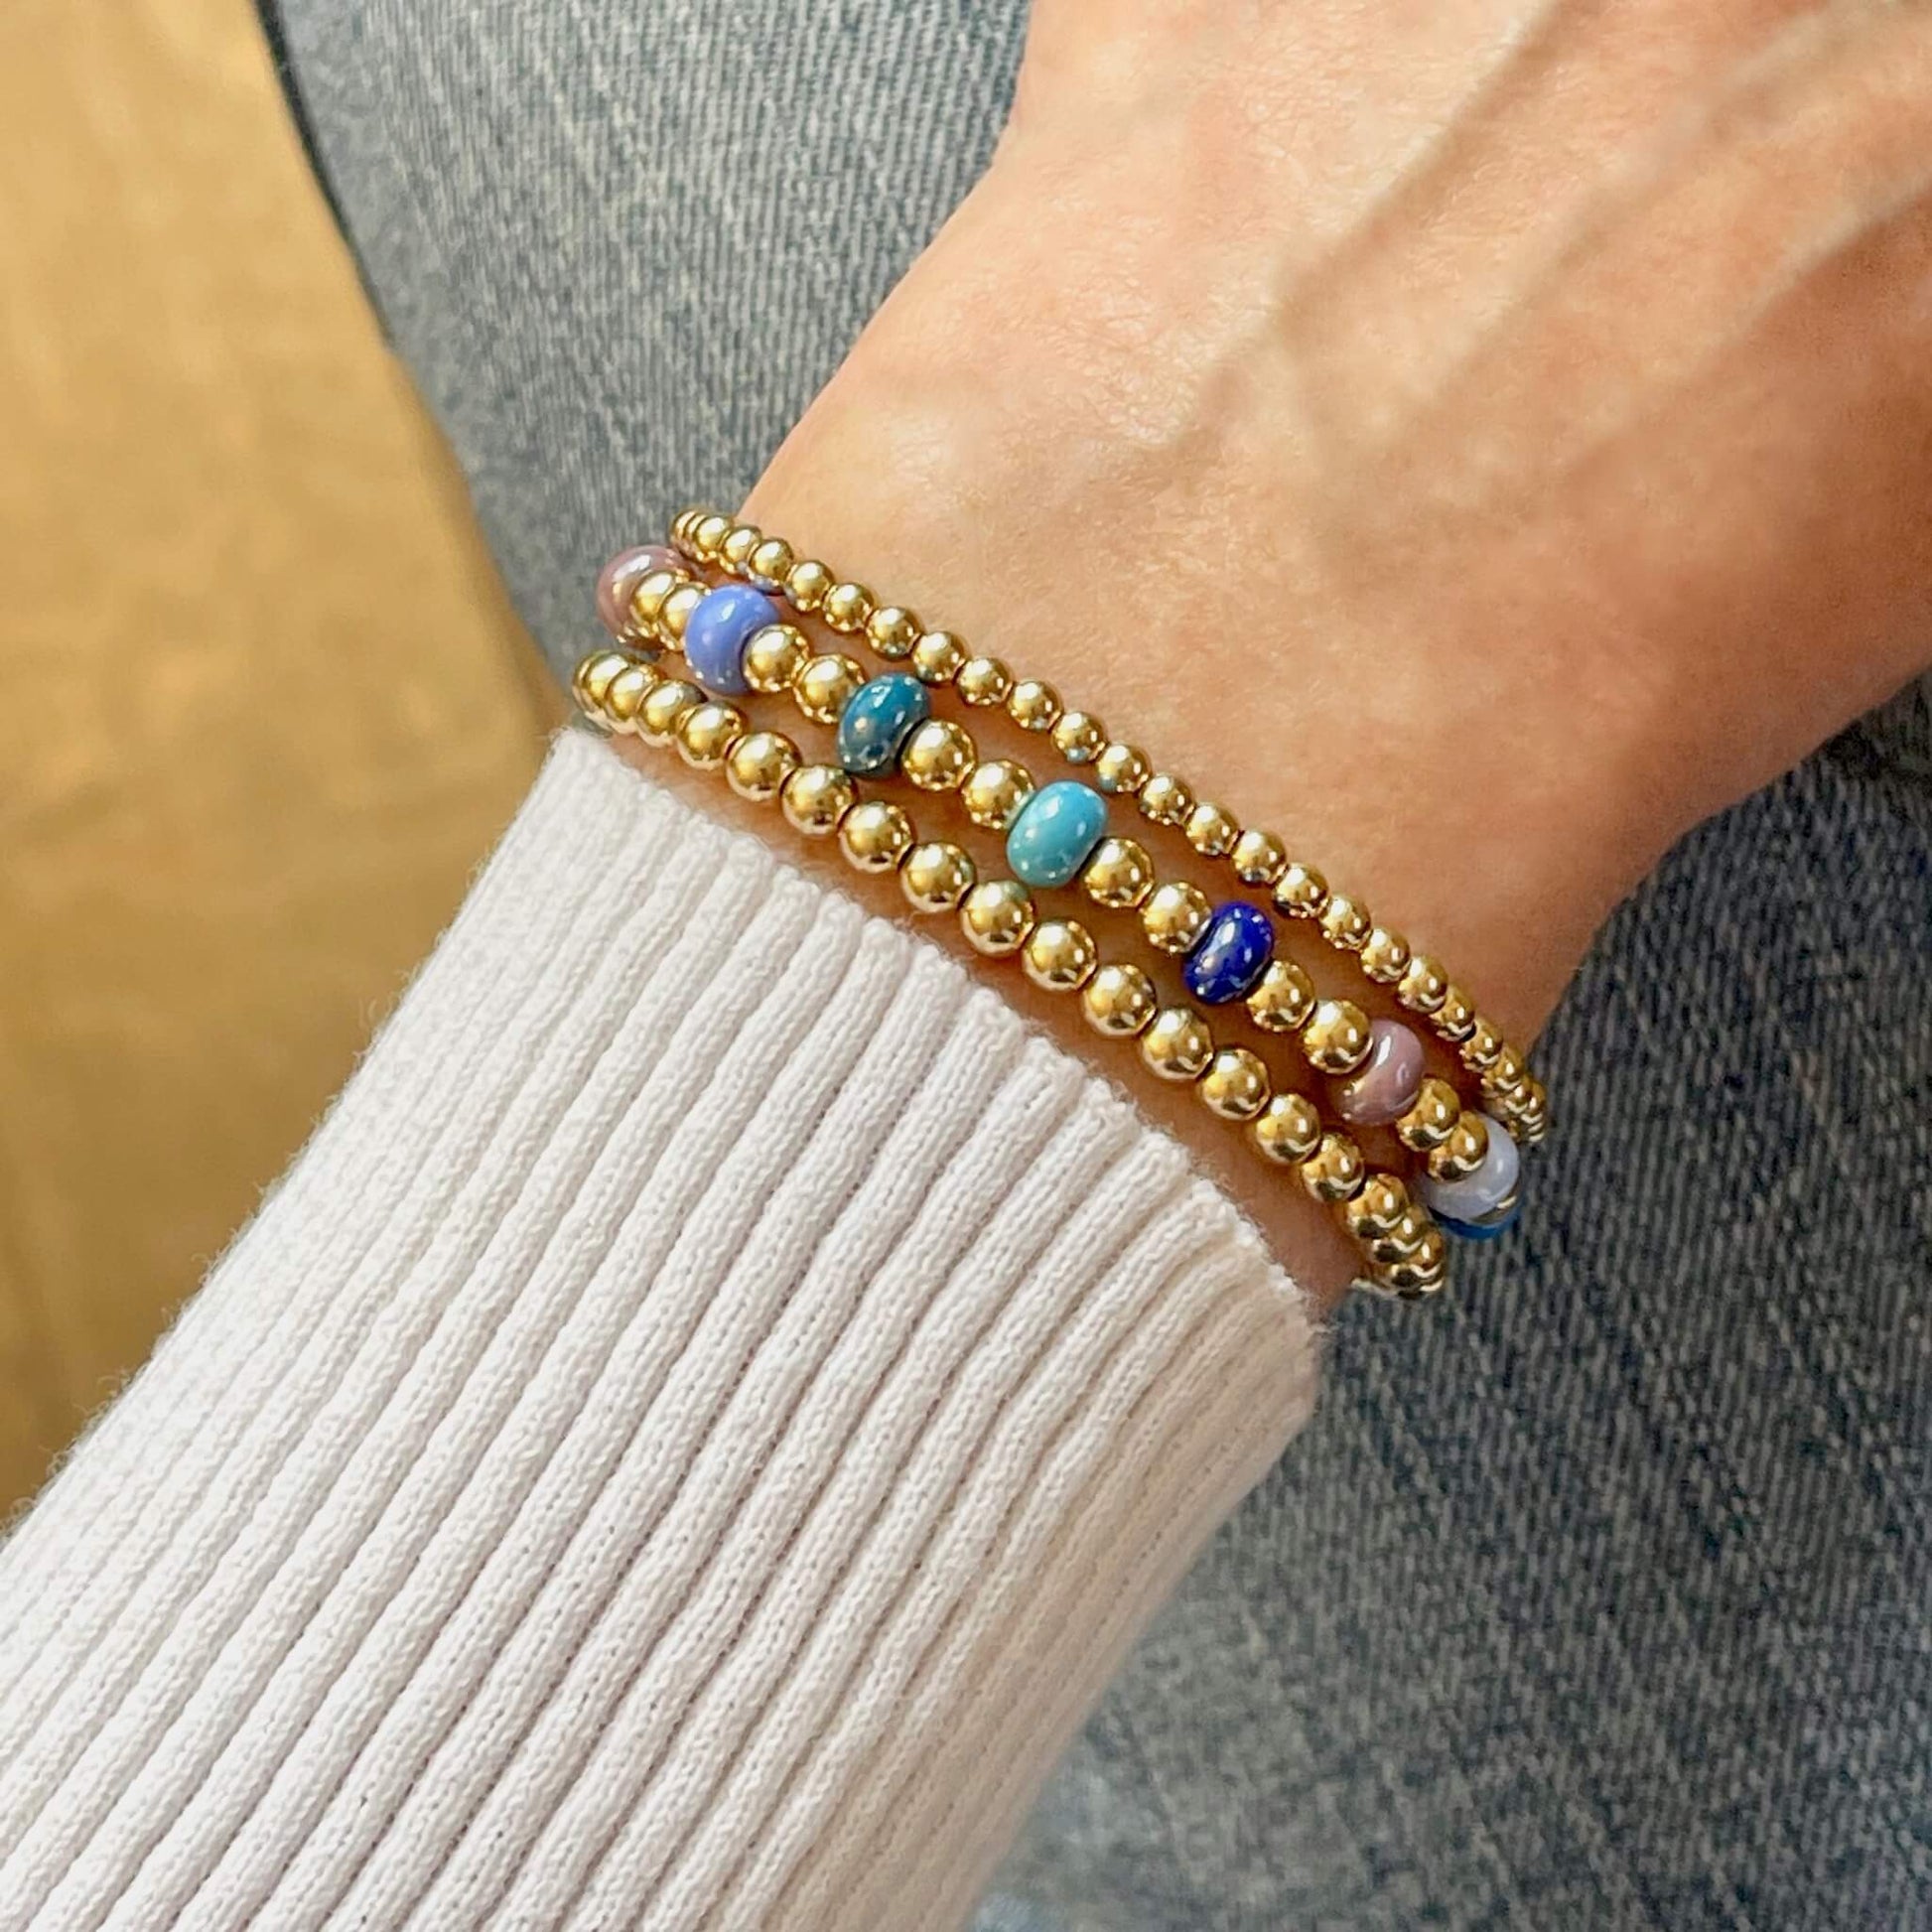 Set of 3 Monochromatic Beaded Stretch Bracelets in Gold and Shades of Blue & Plum.